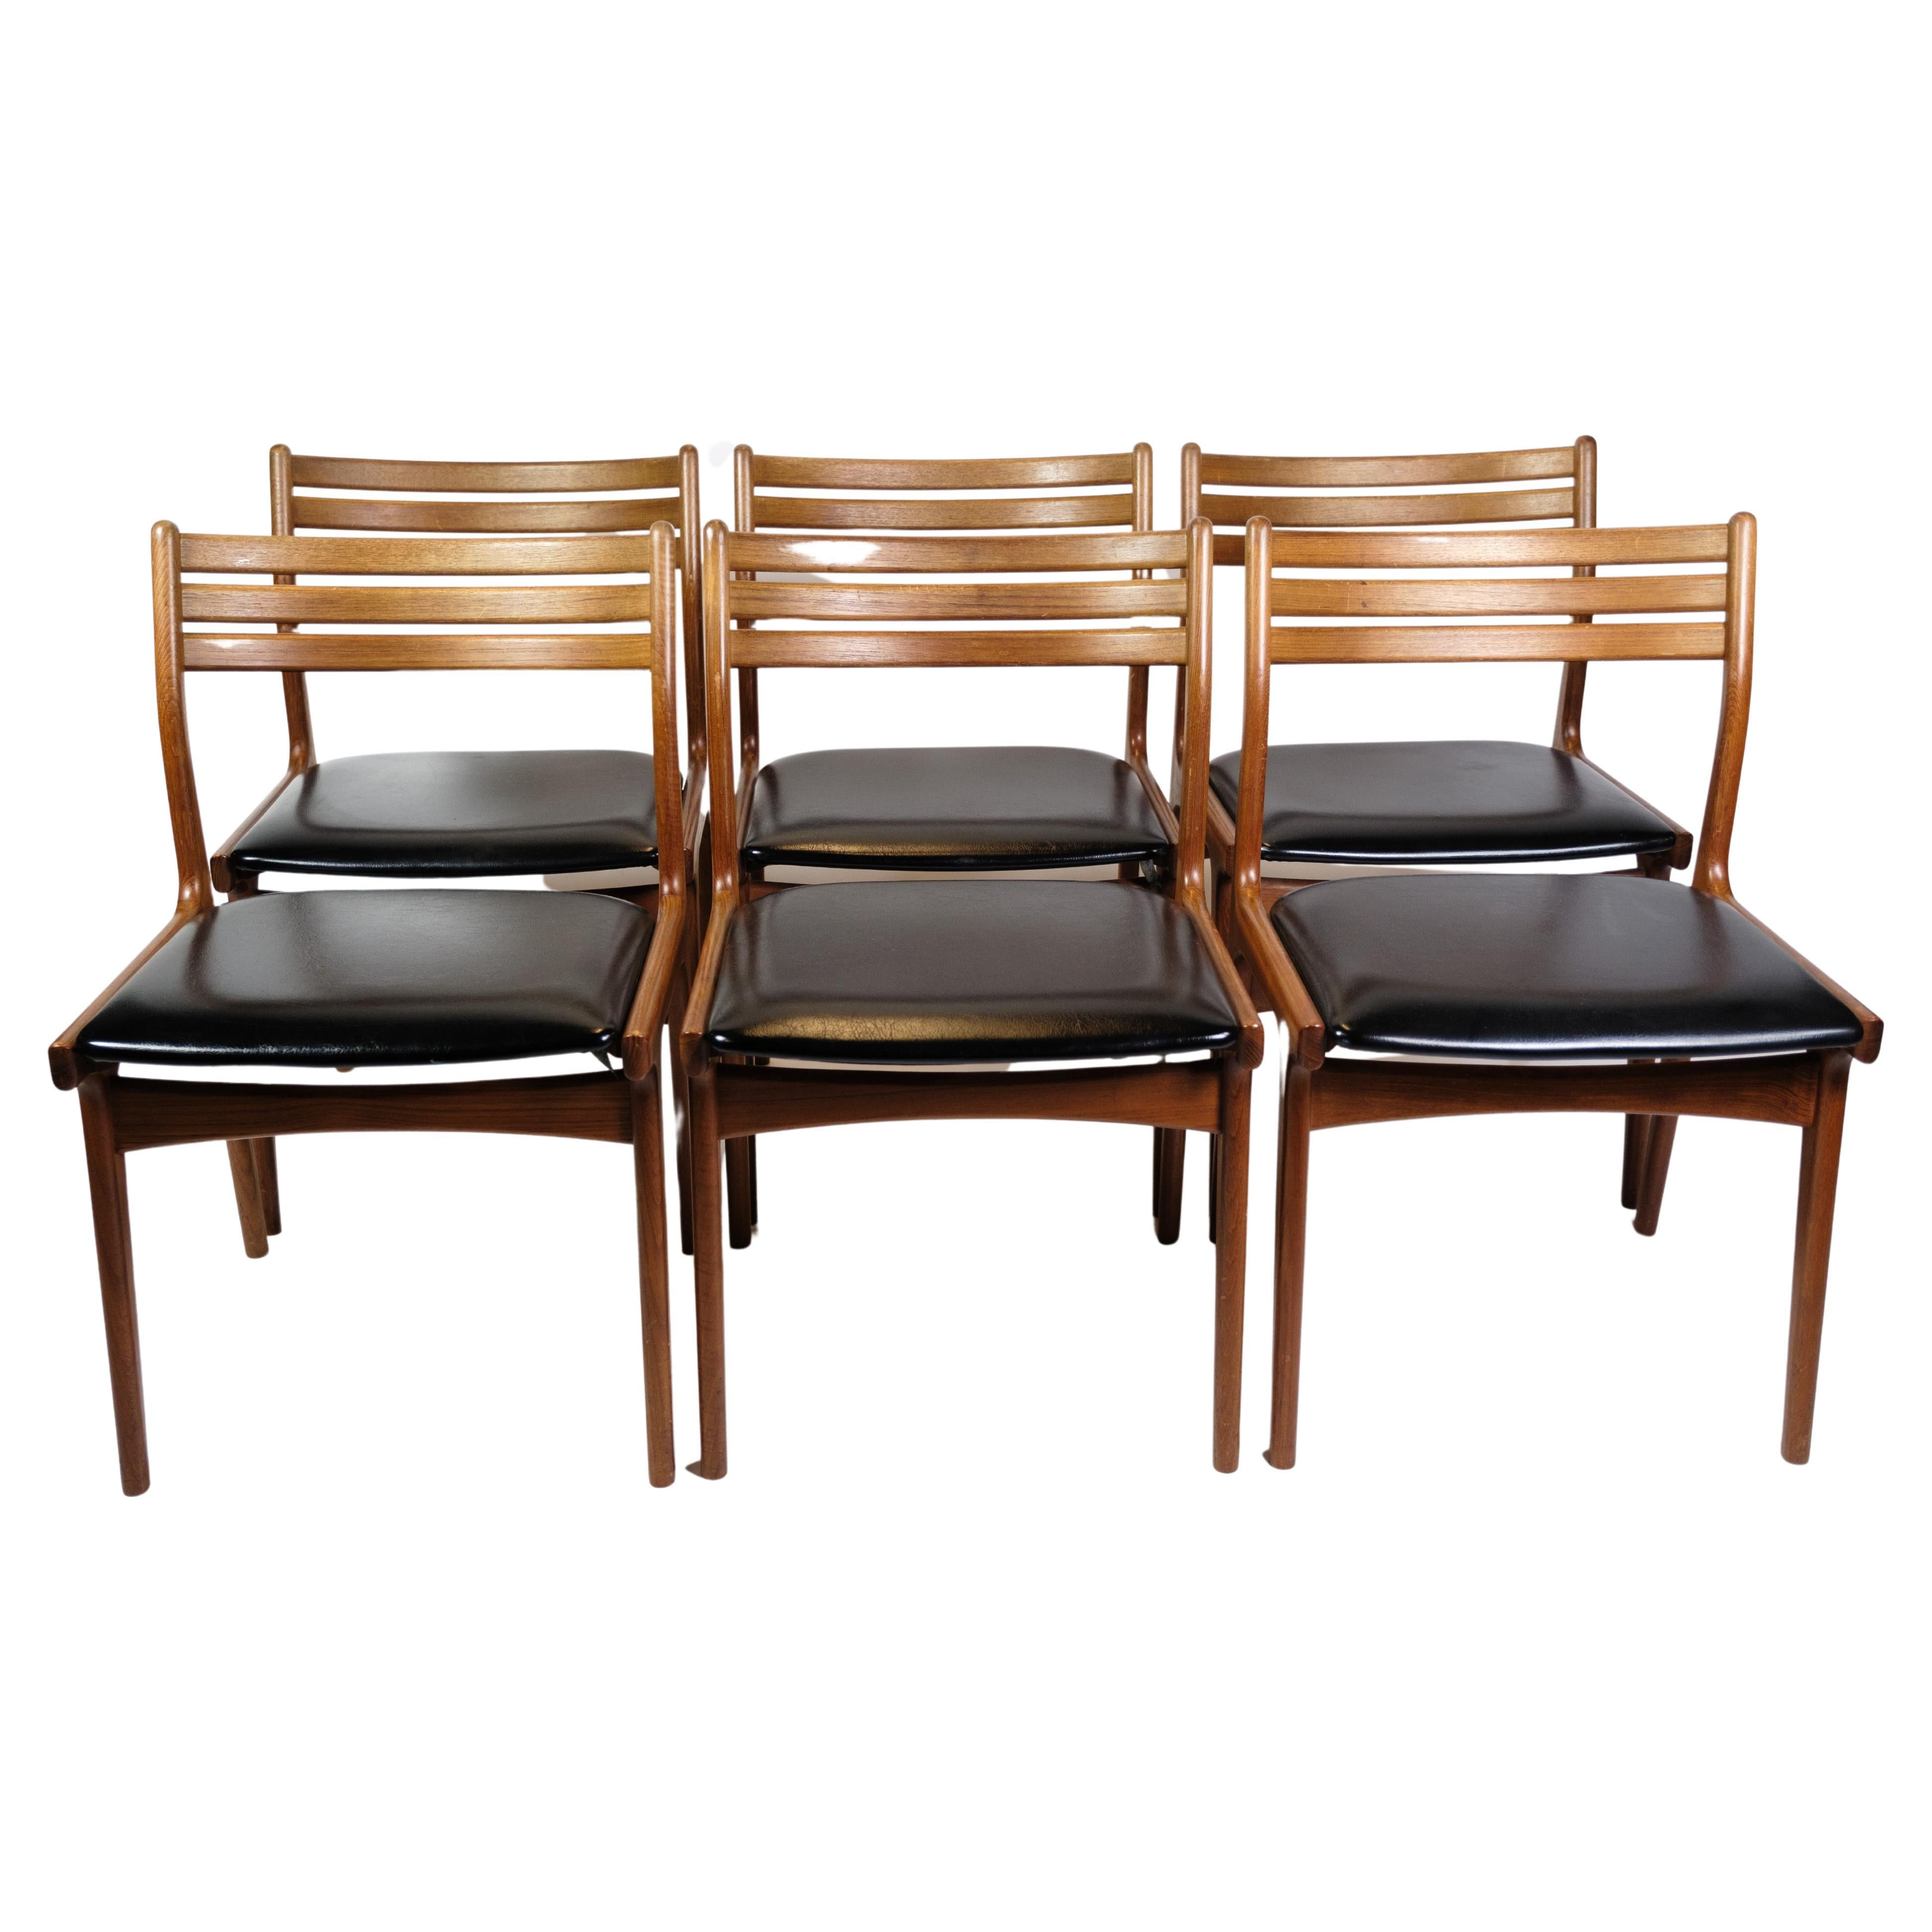 Set Of 6 Dining Room Chairs Model U20 Made In Teak By Johannes Andersen 1960s For Sale